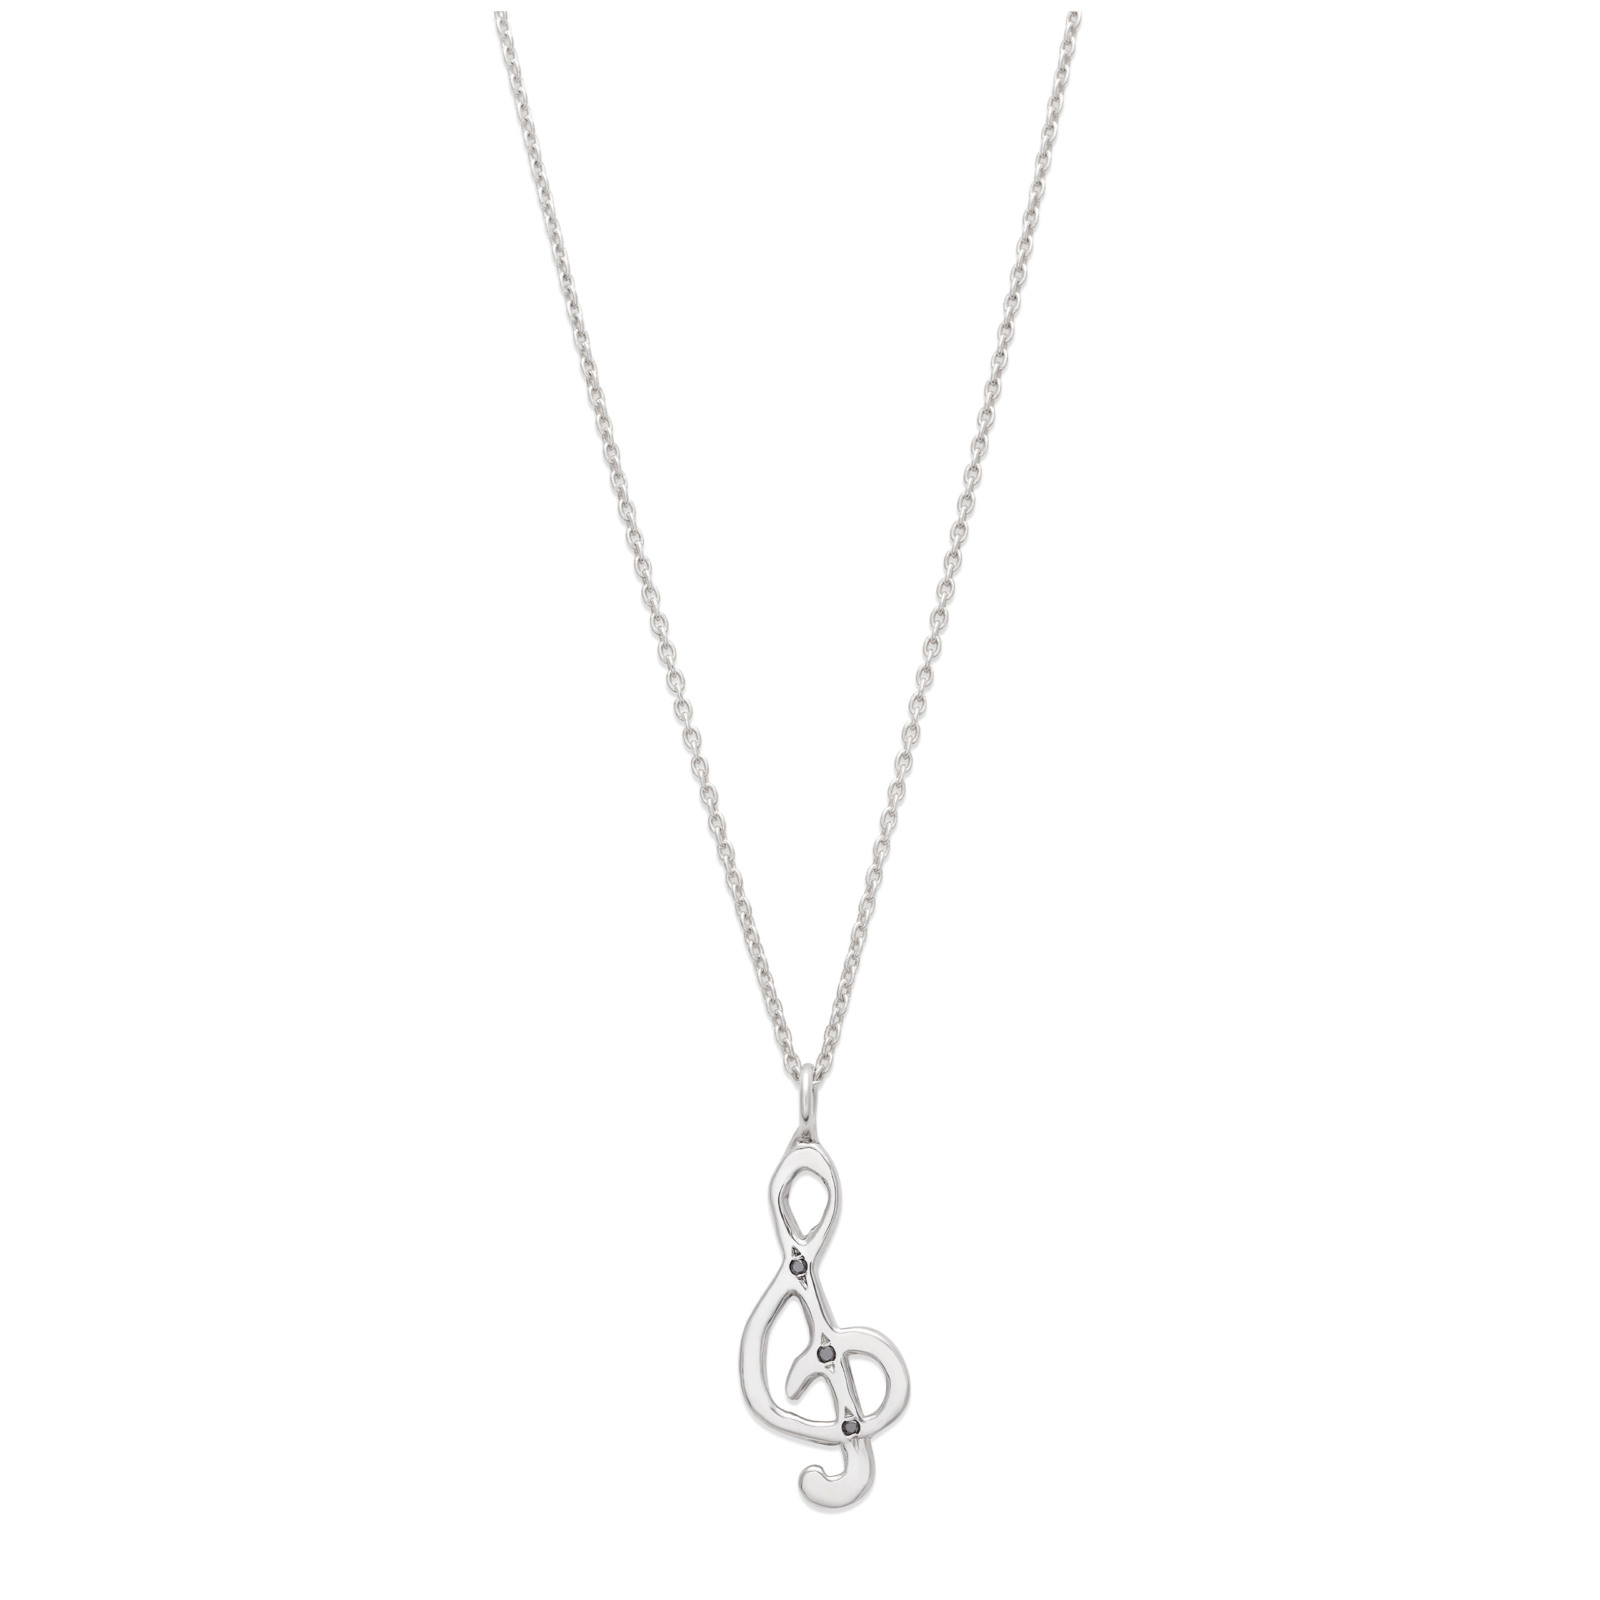 Treble clef charm necklace in sterling silver with black diamonds